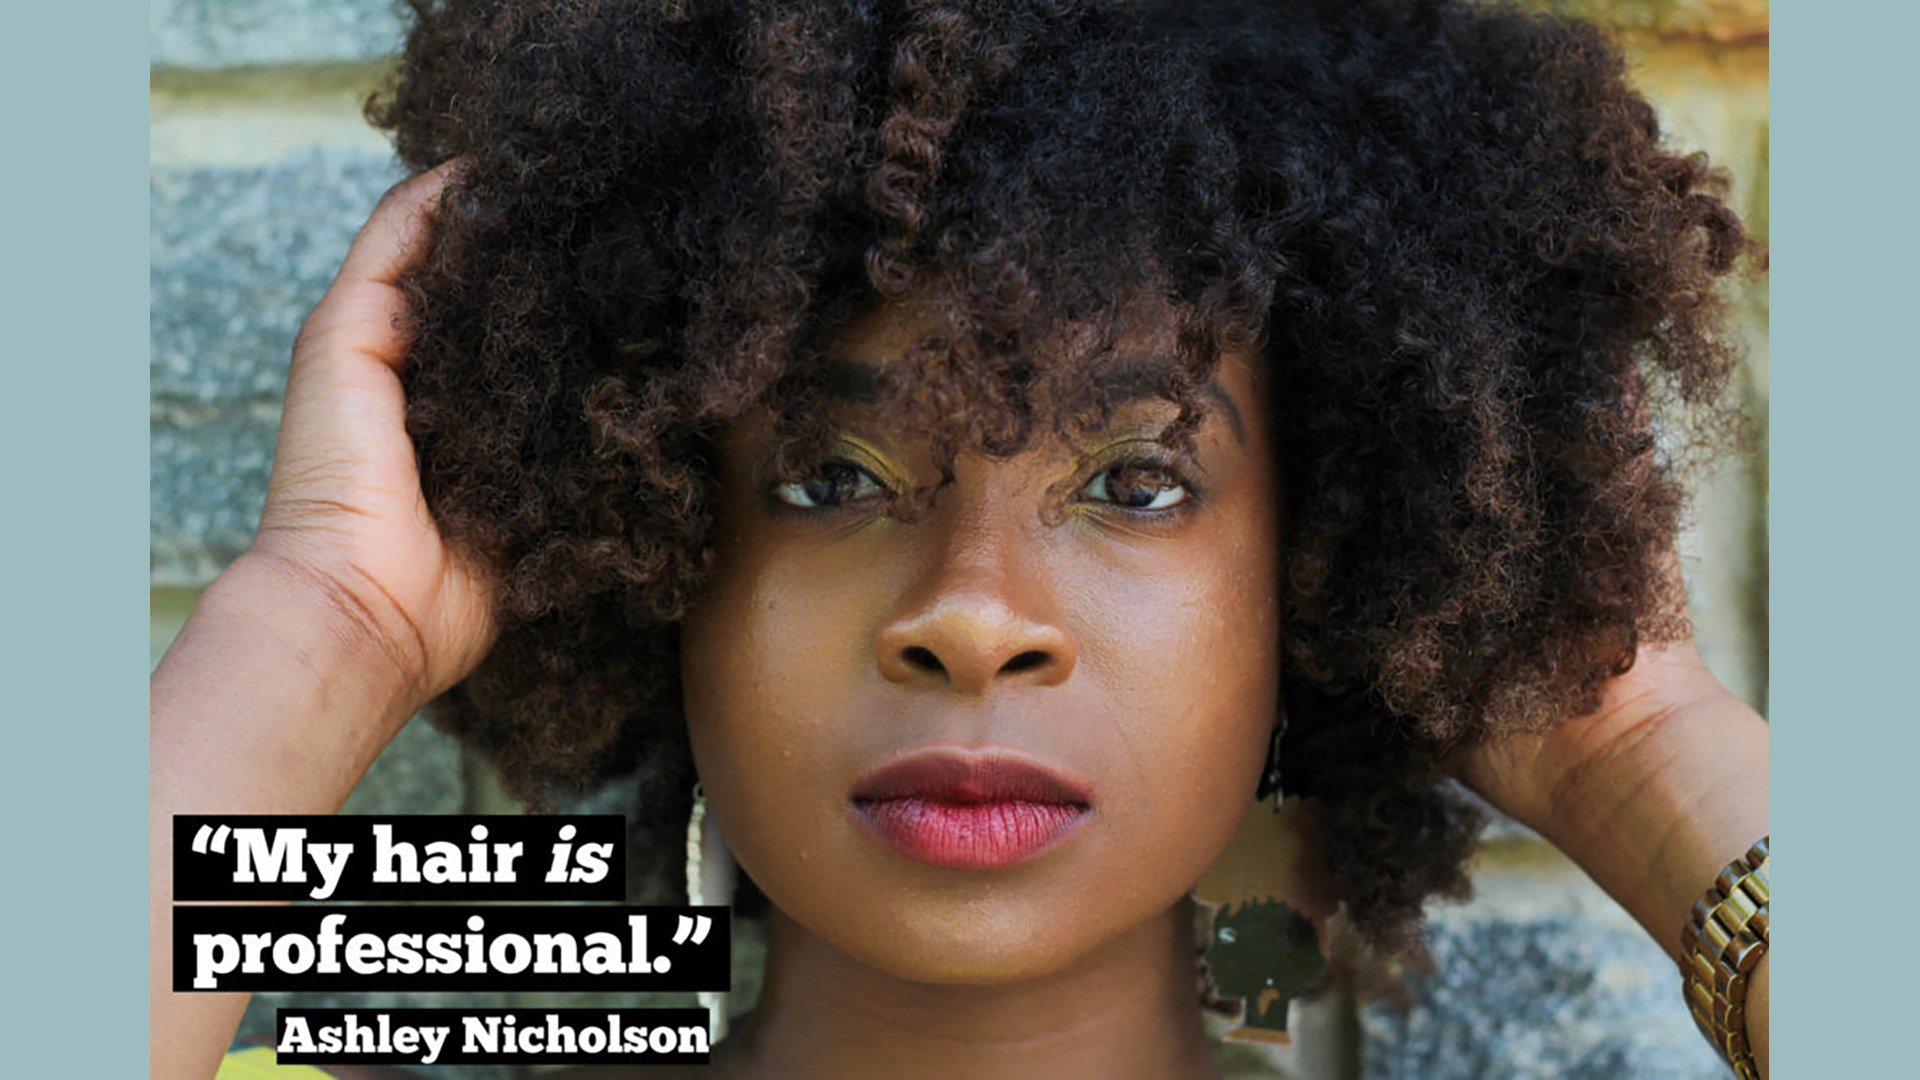 Beautiful Black Hair: Celebrating our crowns through empowering stories